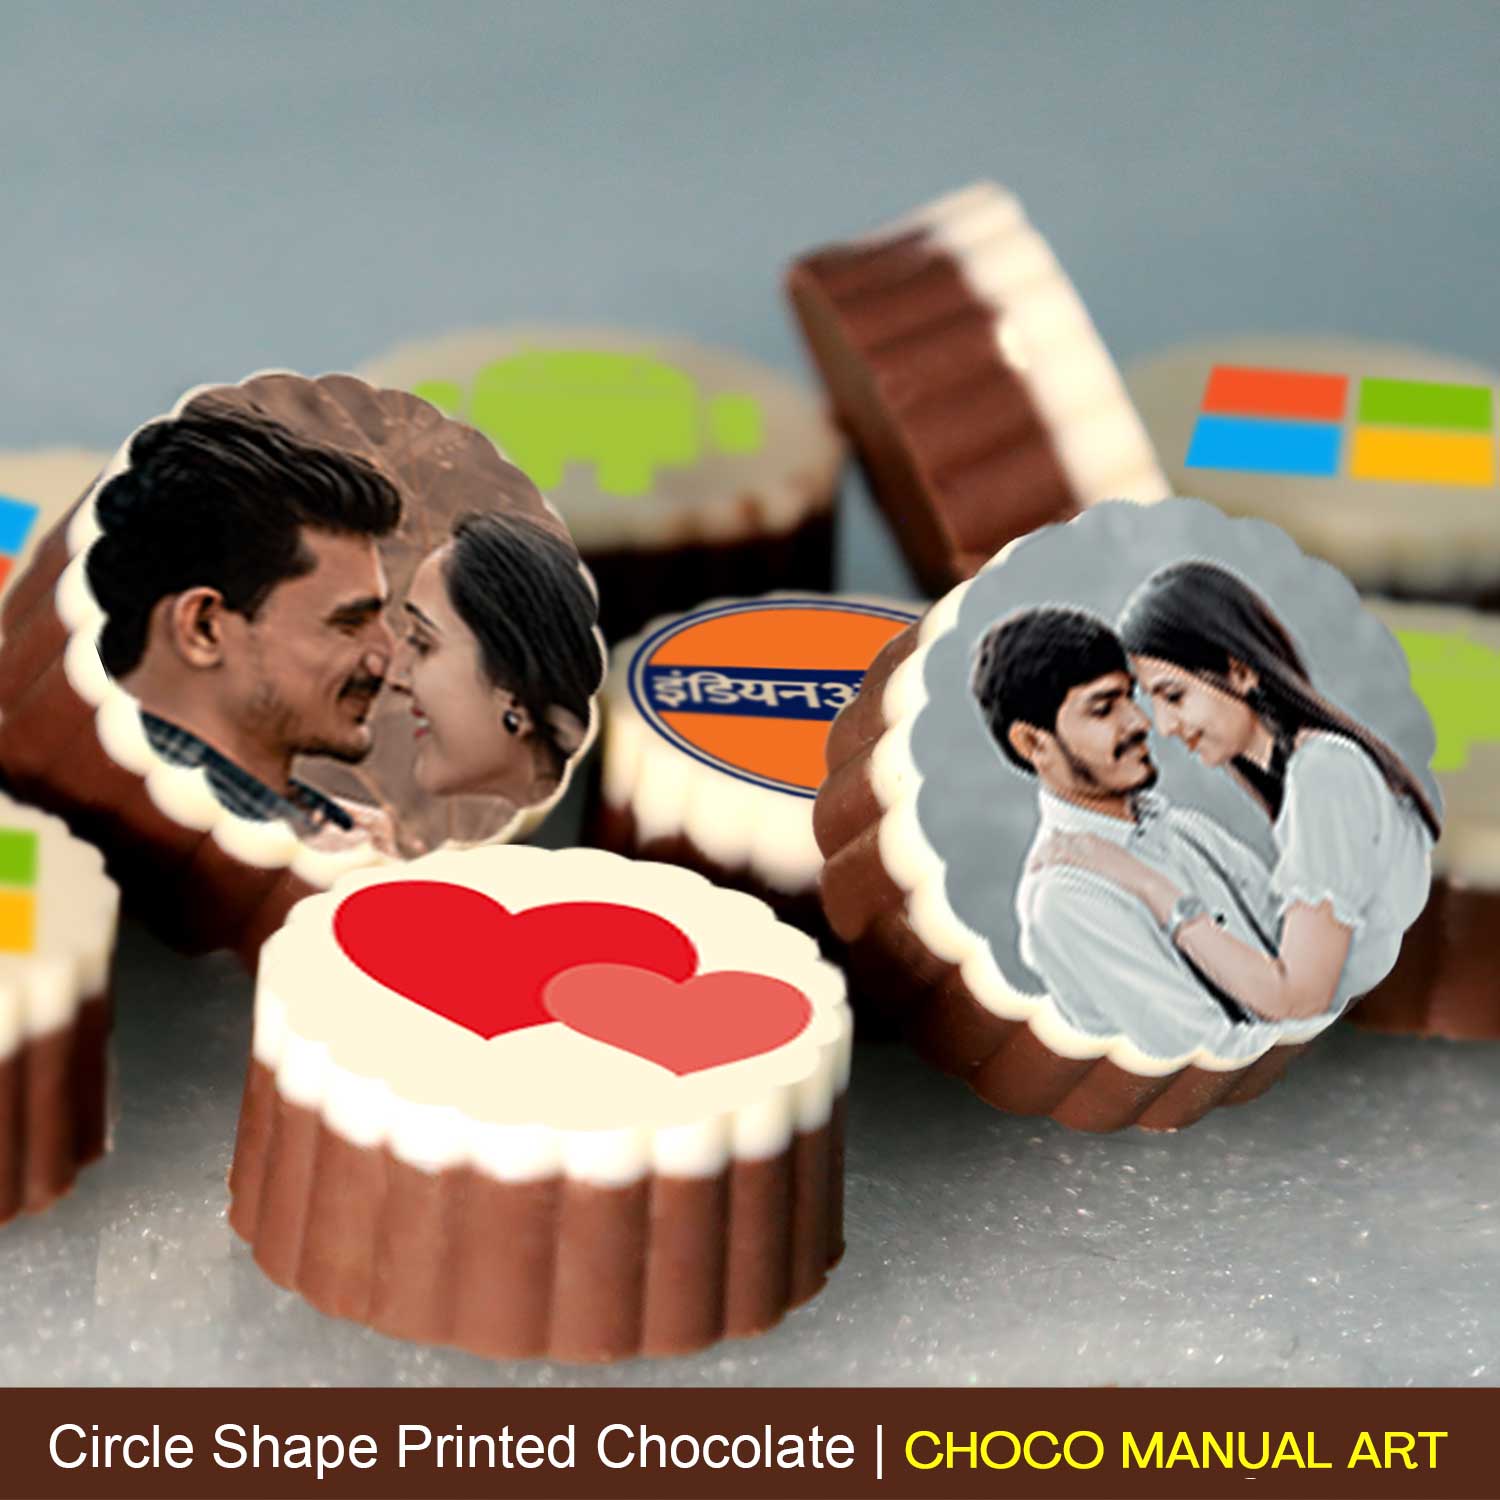 Send happy birthday chocolate love theme cake Online | Free Delivery | Gift  Jaipur